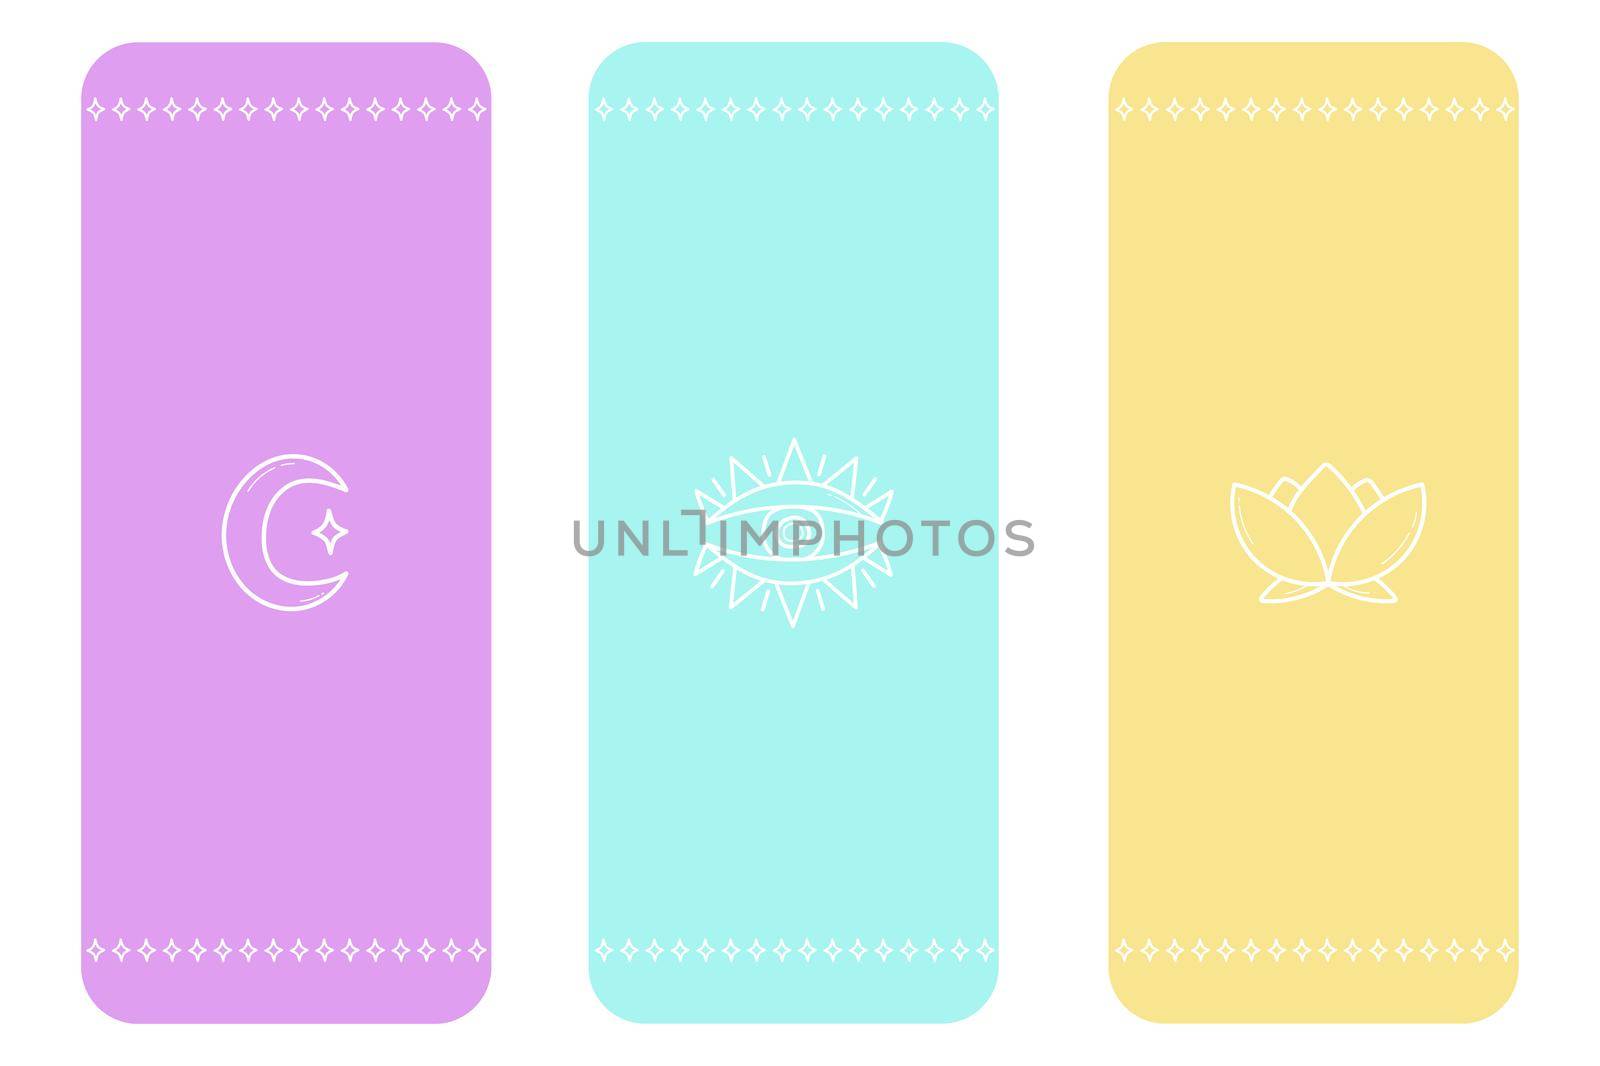 Set of three yoga mat designs. Soft colors with minimalistic zen elements by natali_brill